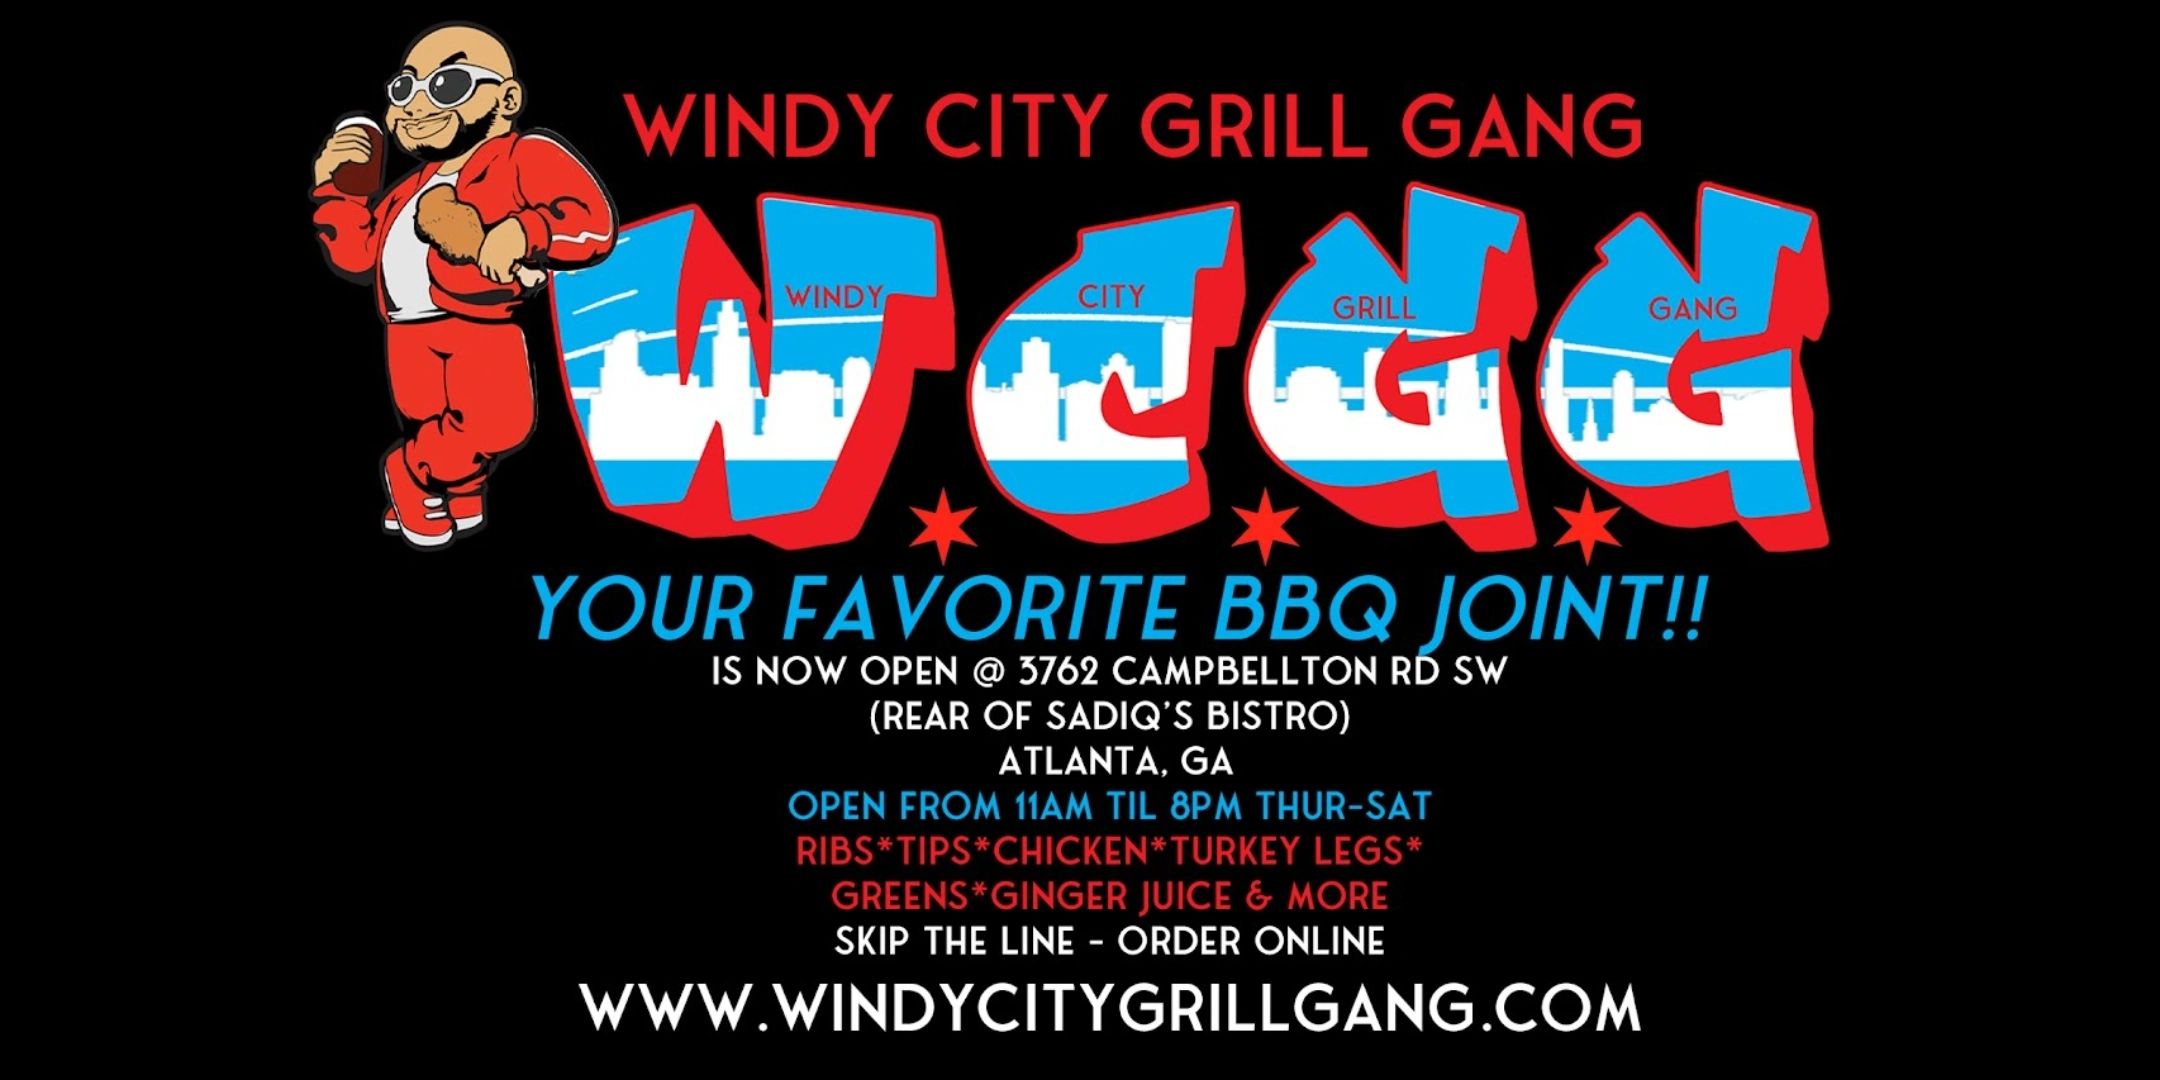 Windy City Grill Gang